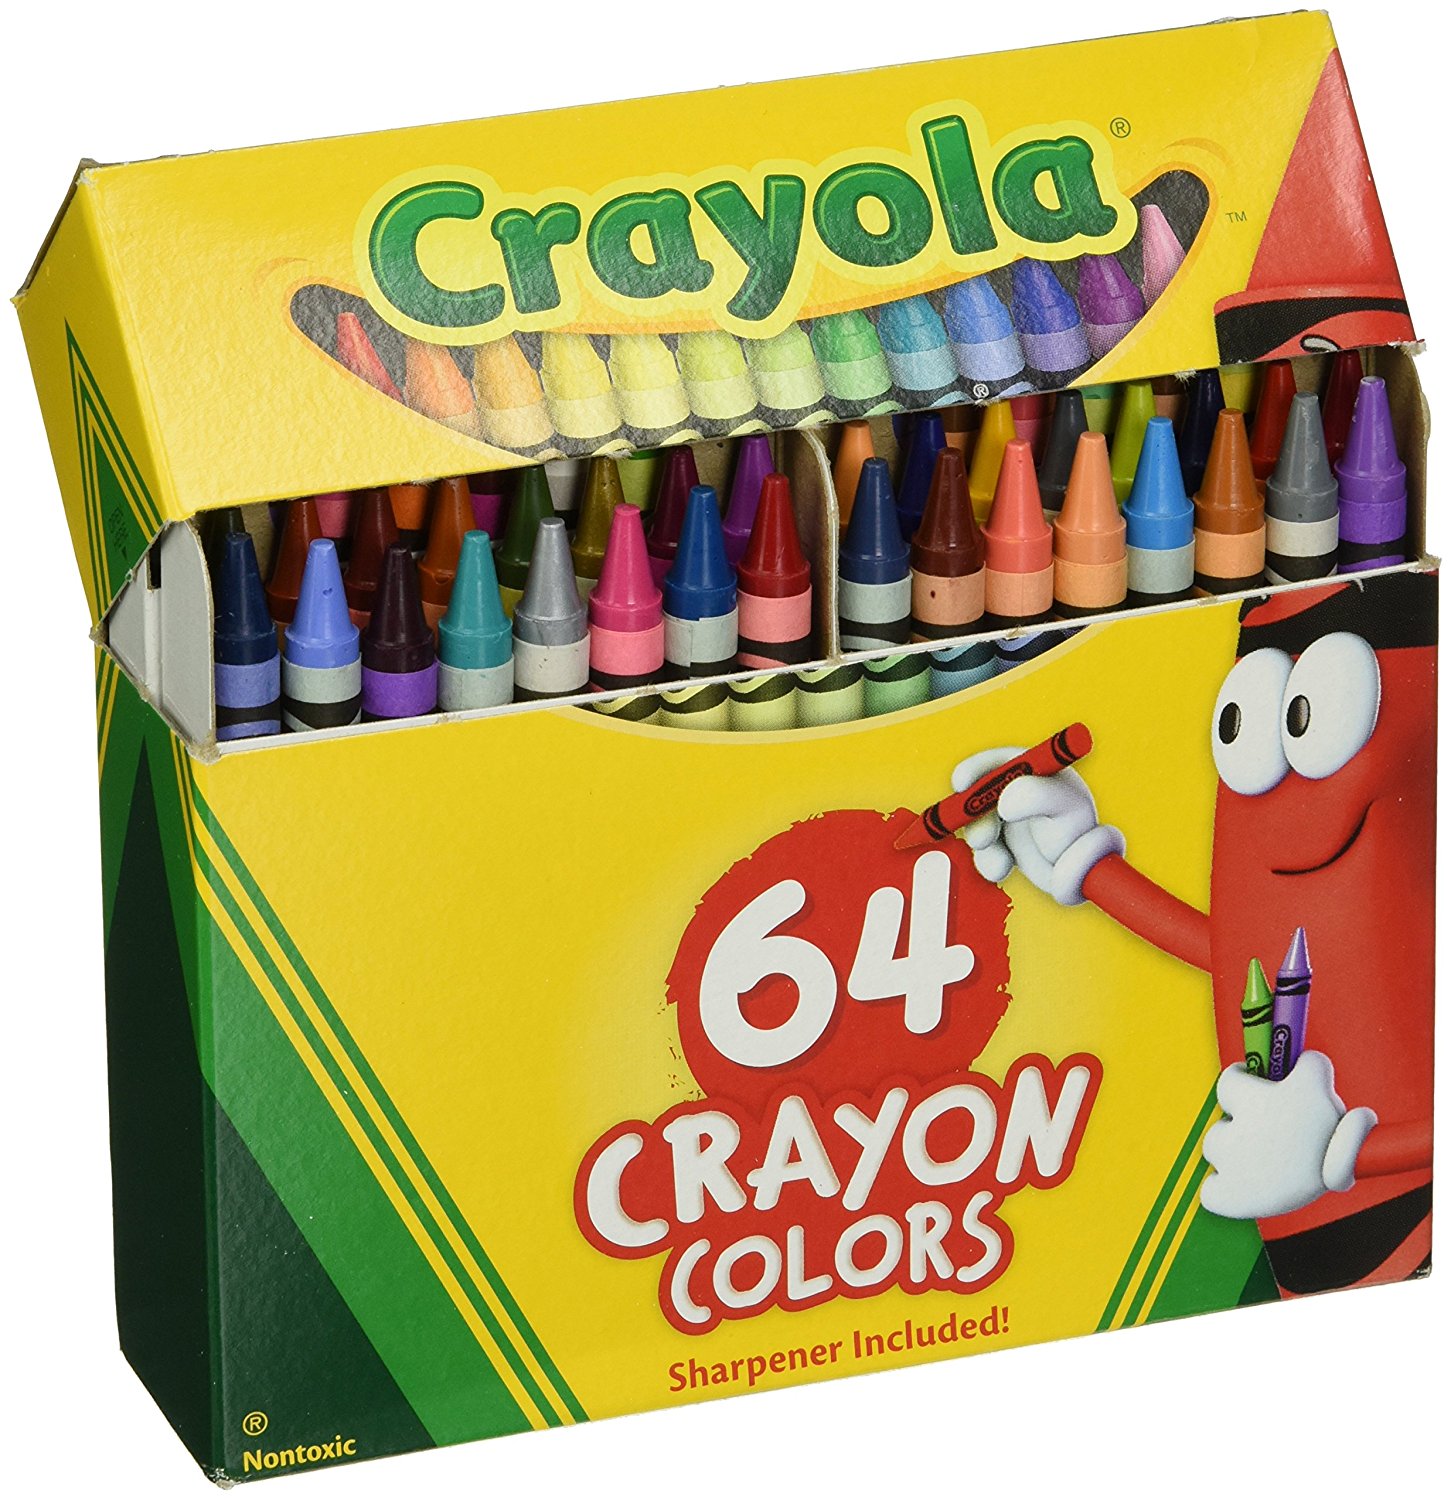 Crayola 64 Count Crayons Set of 3 Only $8.68! That’s $2.89 Each!